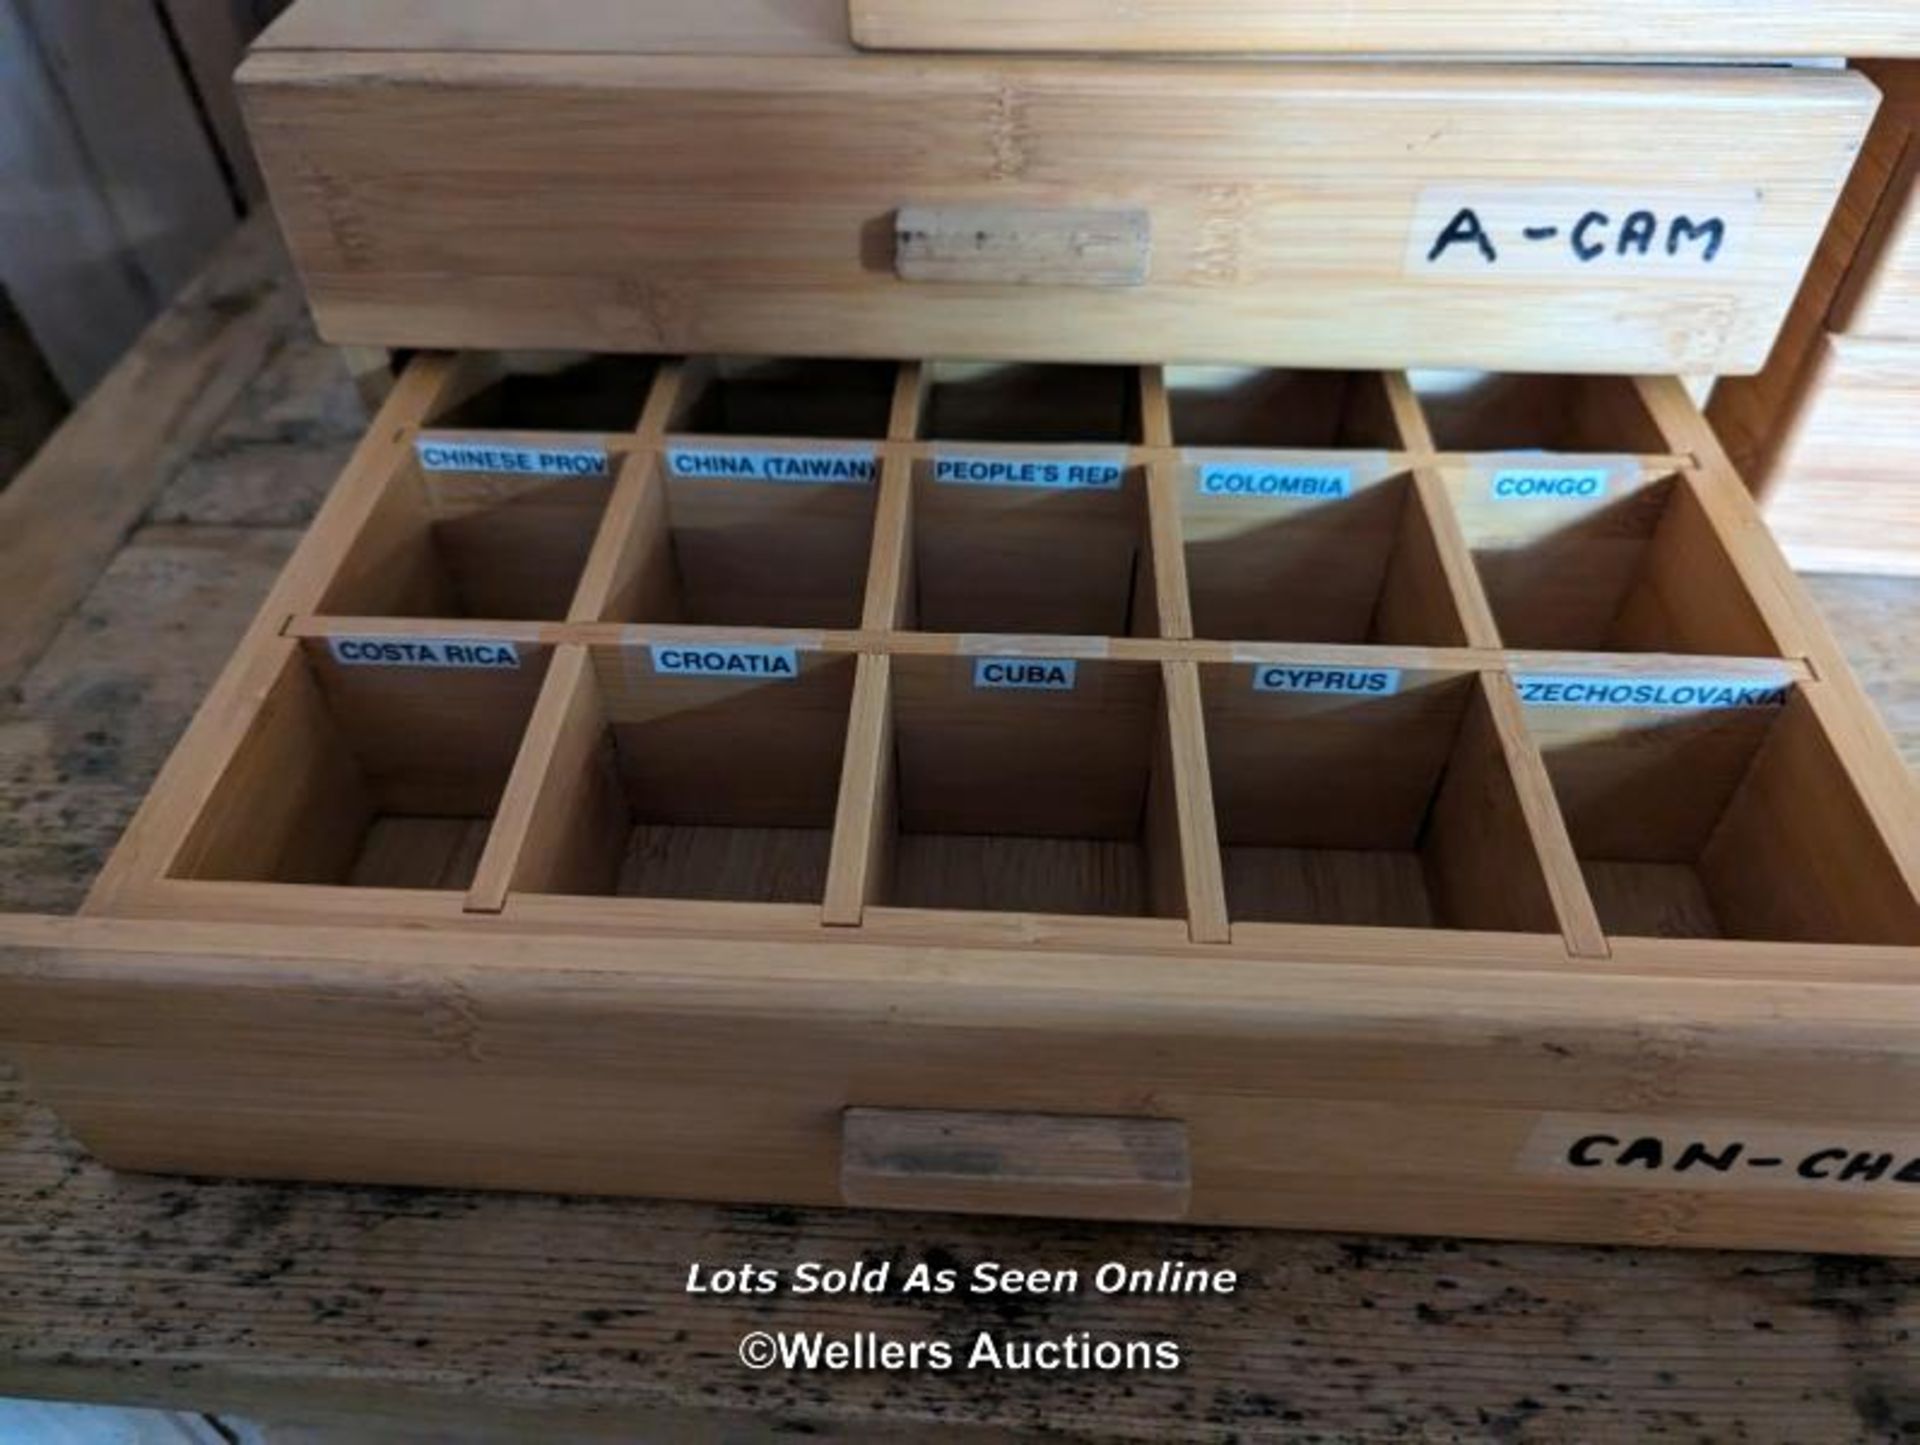 5 wooden storage units with 2 drawers per unit. Used orignally for stamp collecting. Each 2 drawer - Image 4 of 6